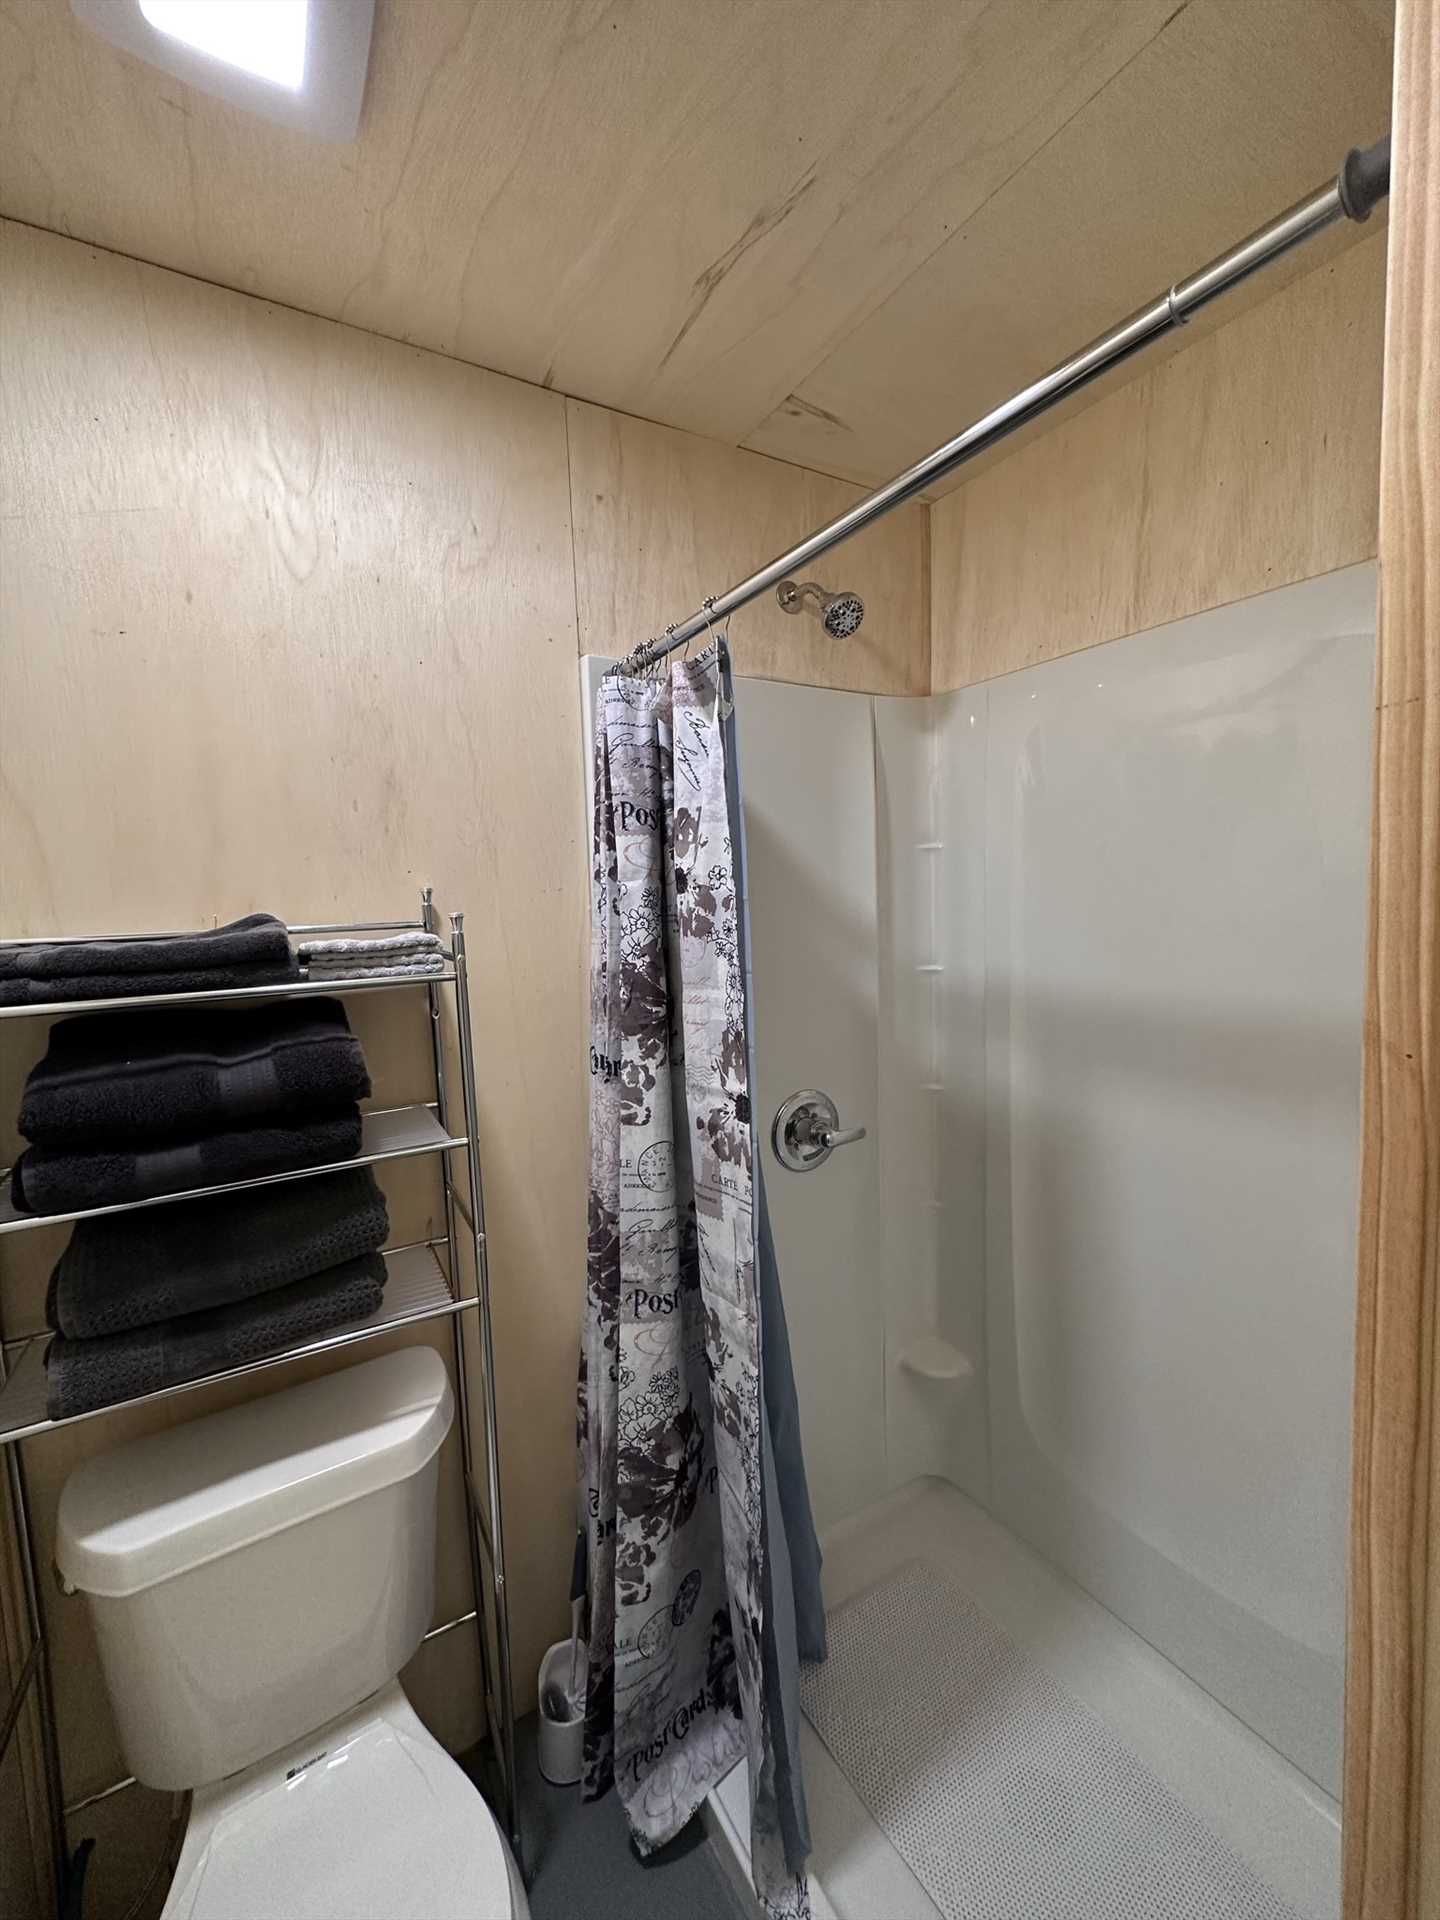                                                 There's a roomy shower stall here, and there are even laundry facilities available when you book a longer stay!